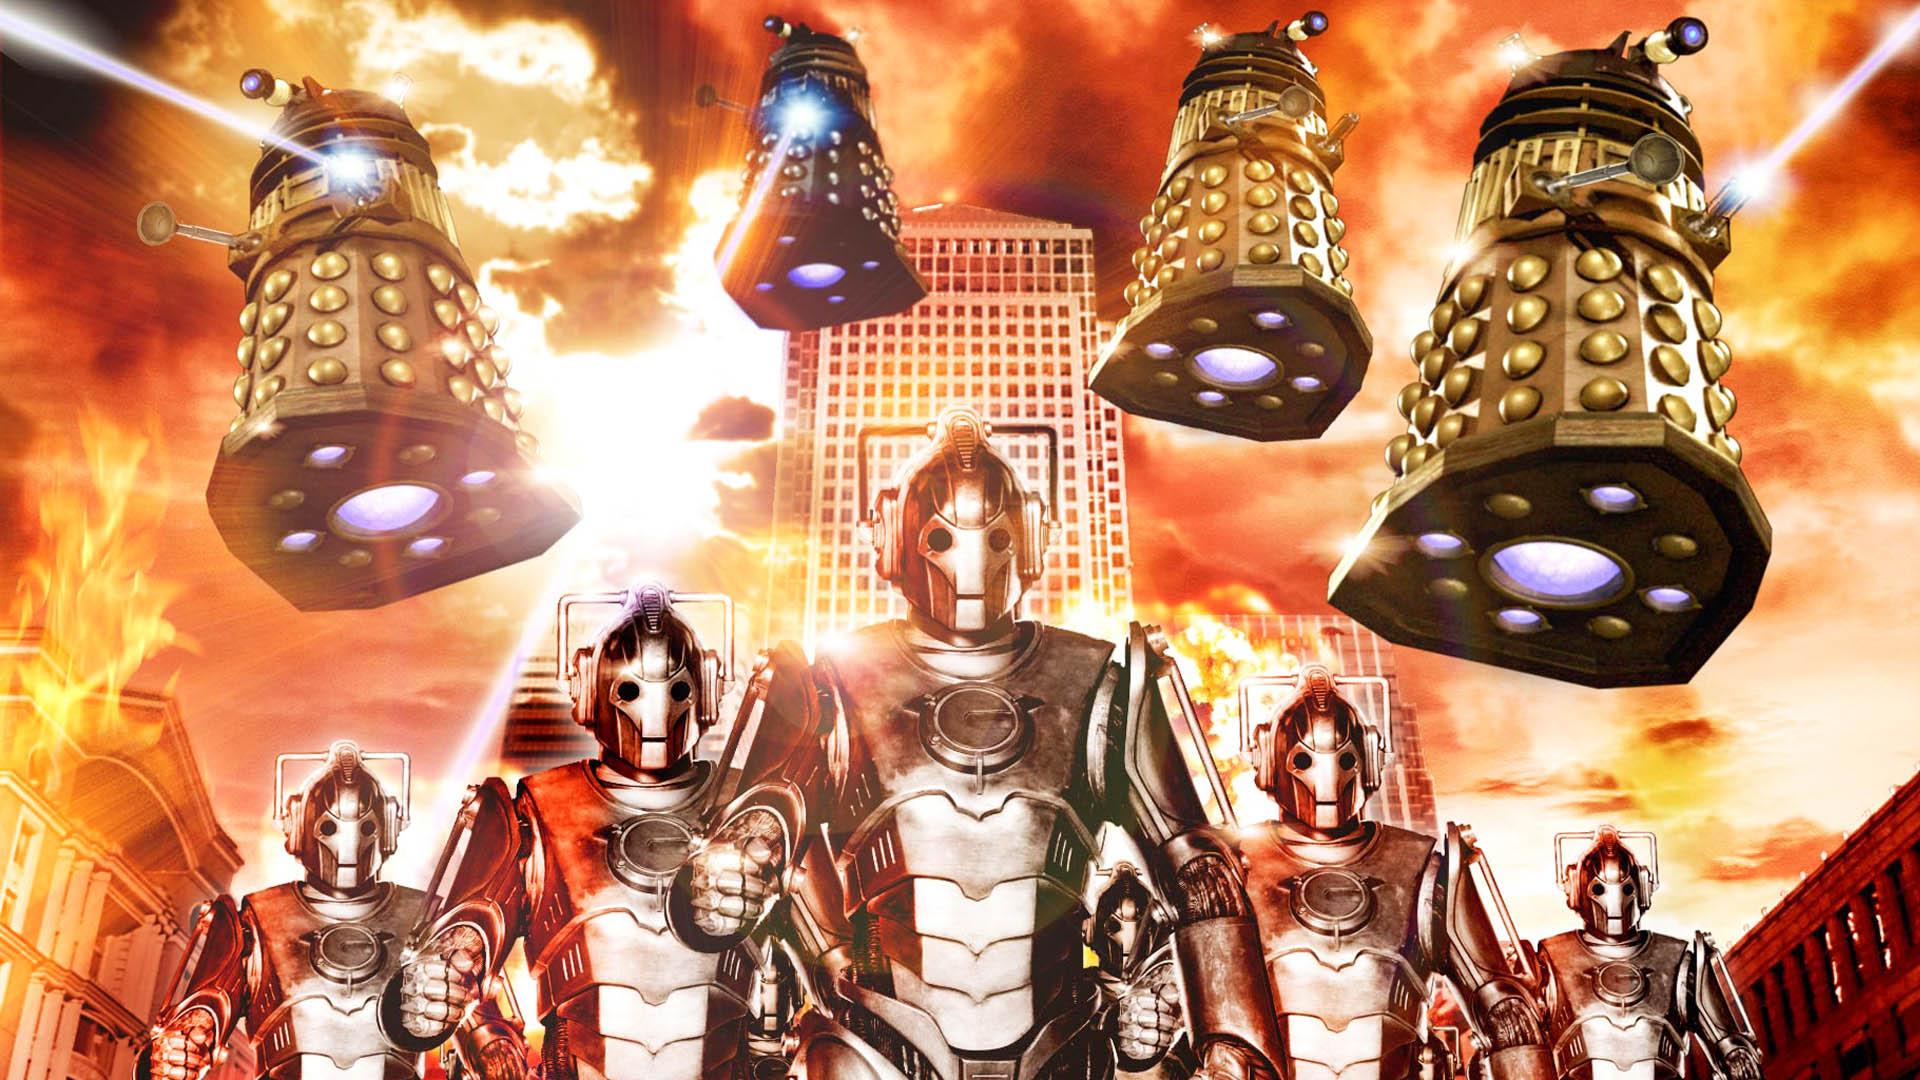 1920 x 1080 · jpeg - Doctor Who TV Show New High Resolution Wallpapers - All HD Wallpapers